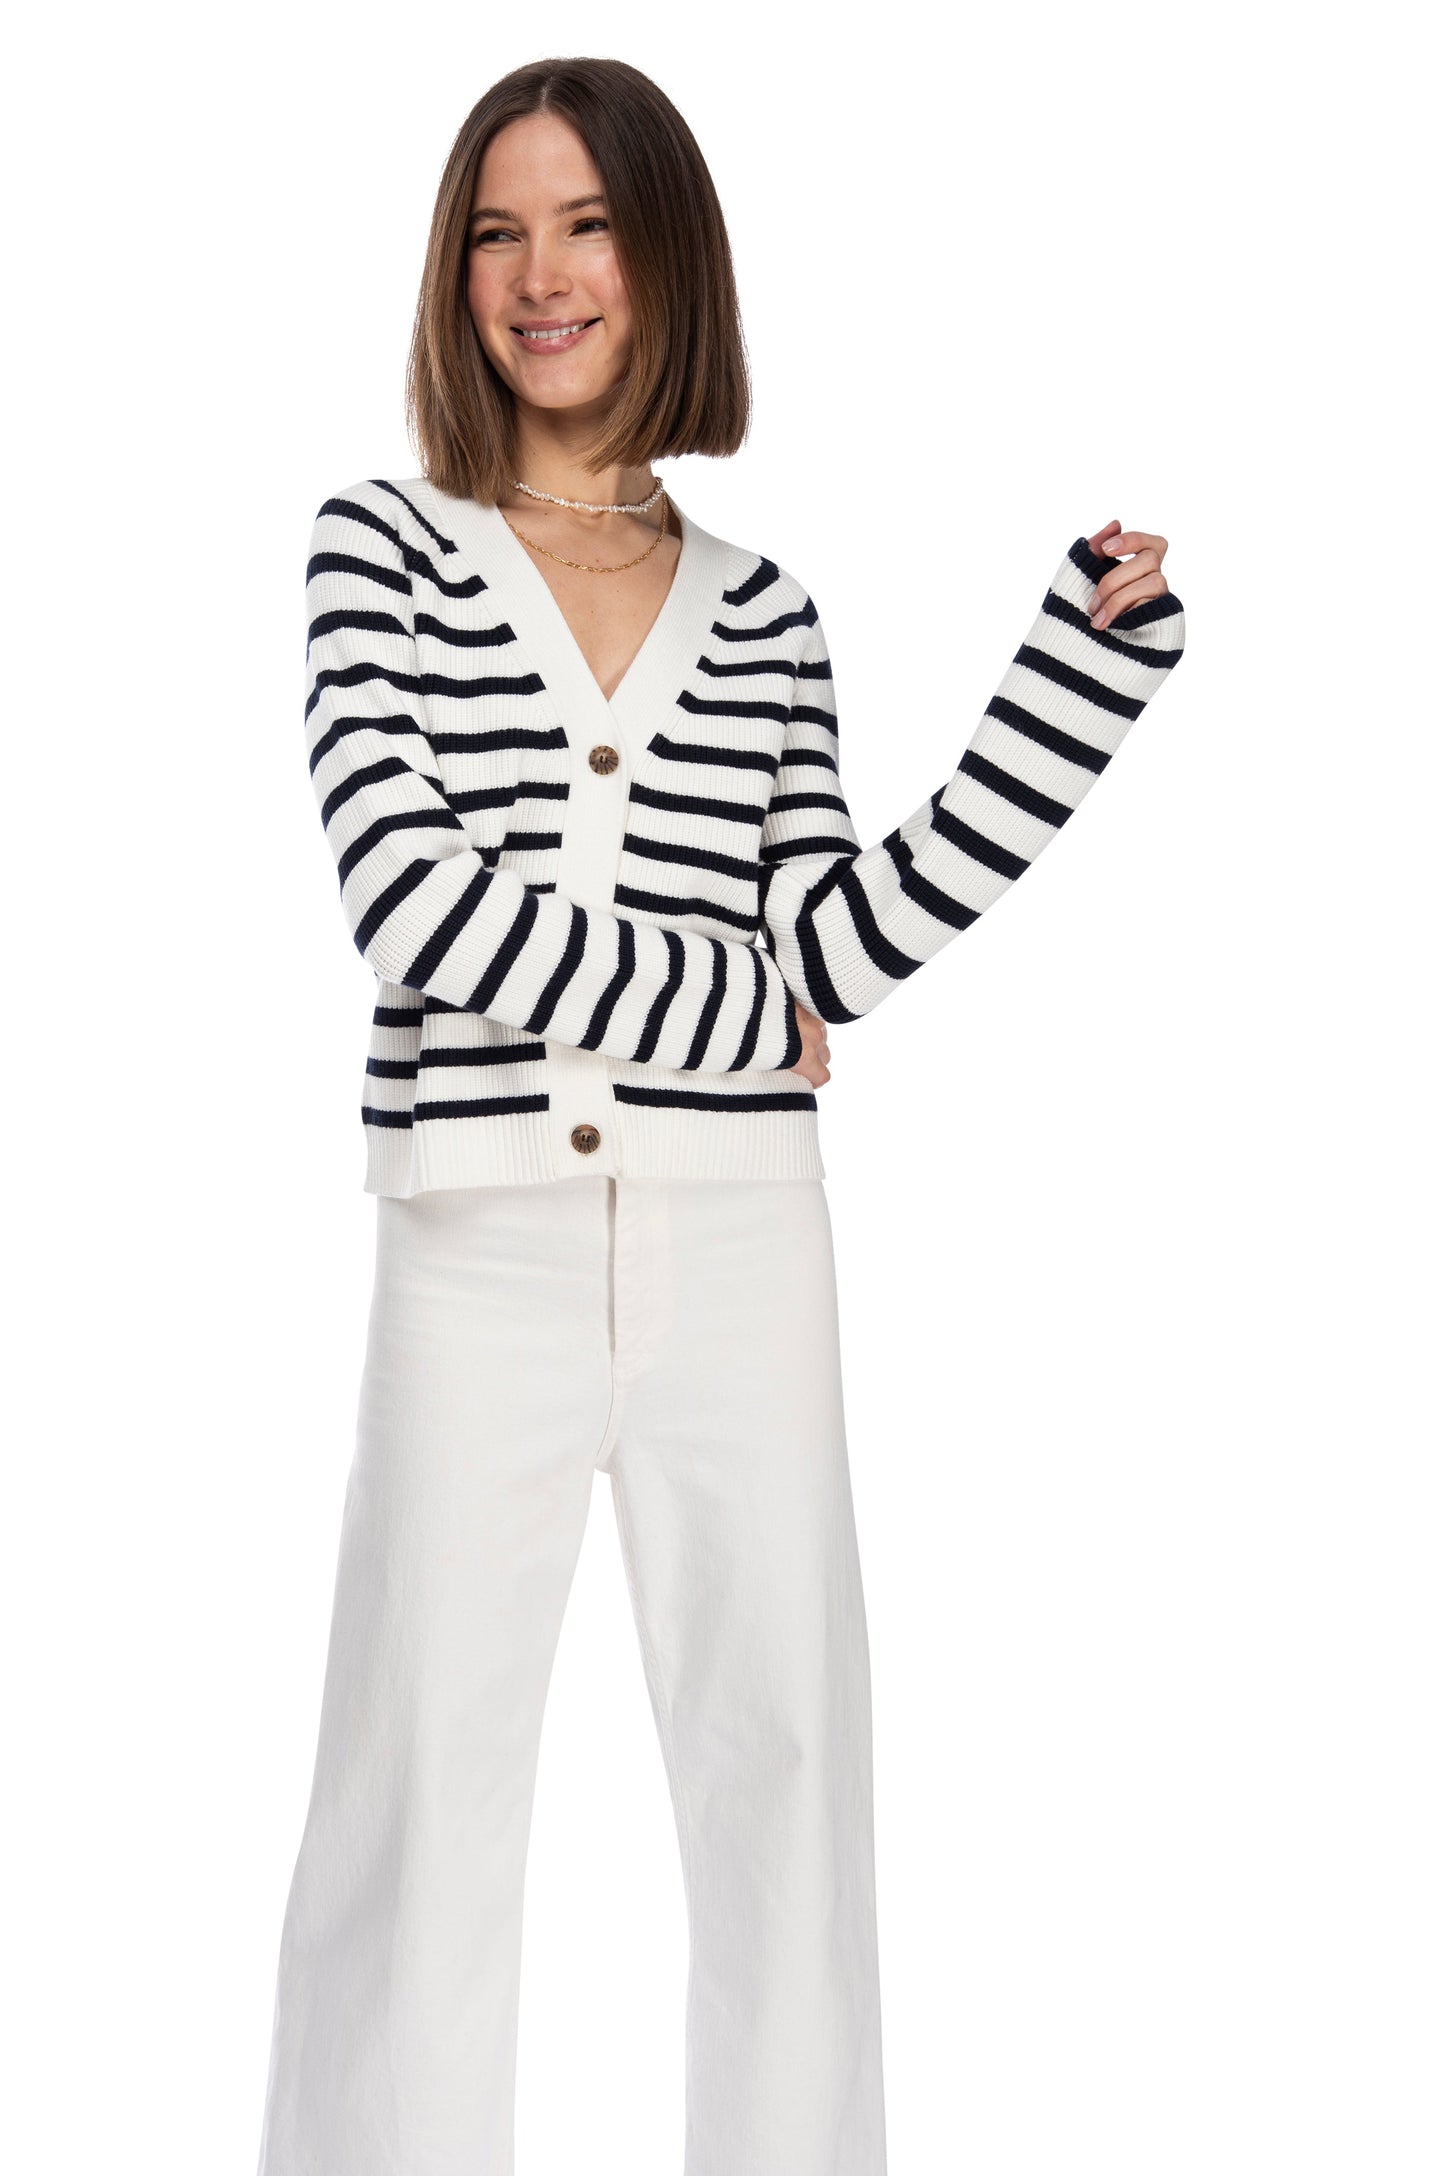 A confident young woman in a LS Stripe Cardigan from B Collection by Bobeau and white pants posing with one hand on her hip against a white background.